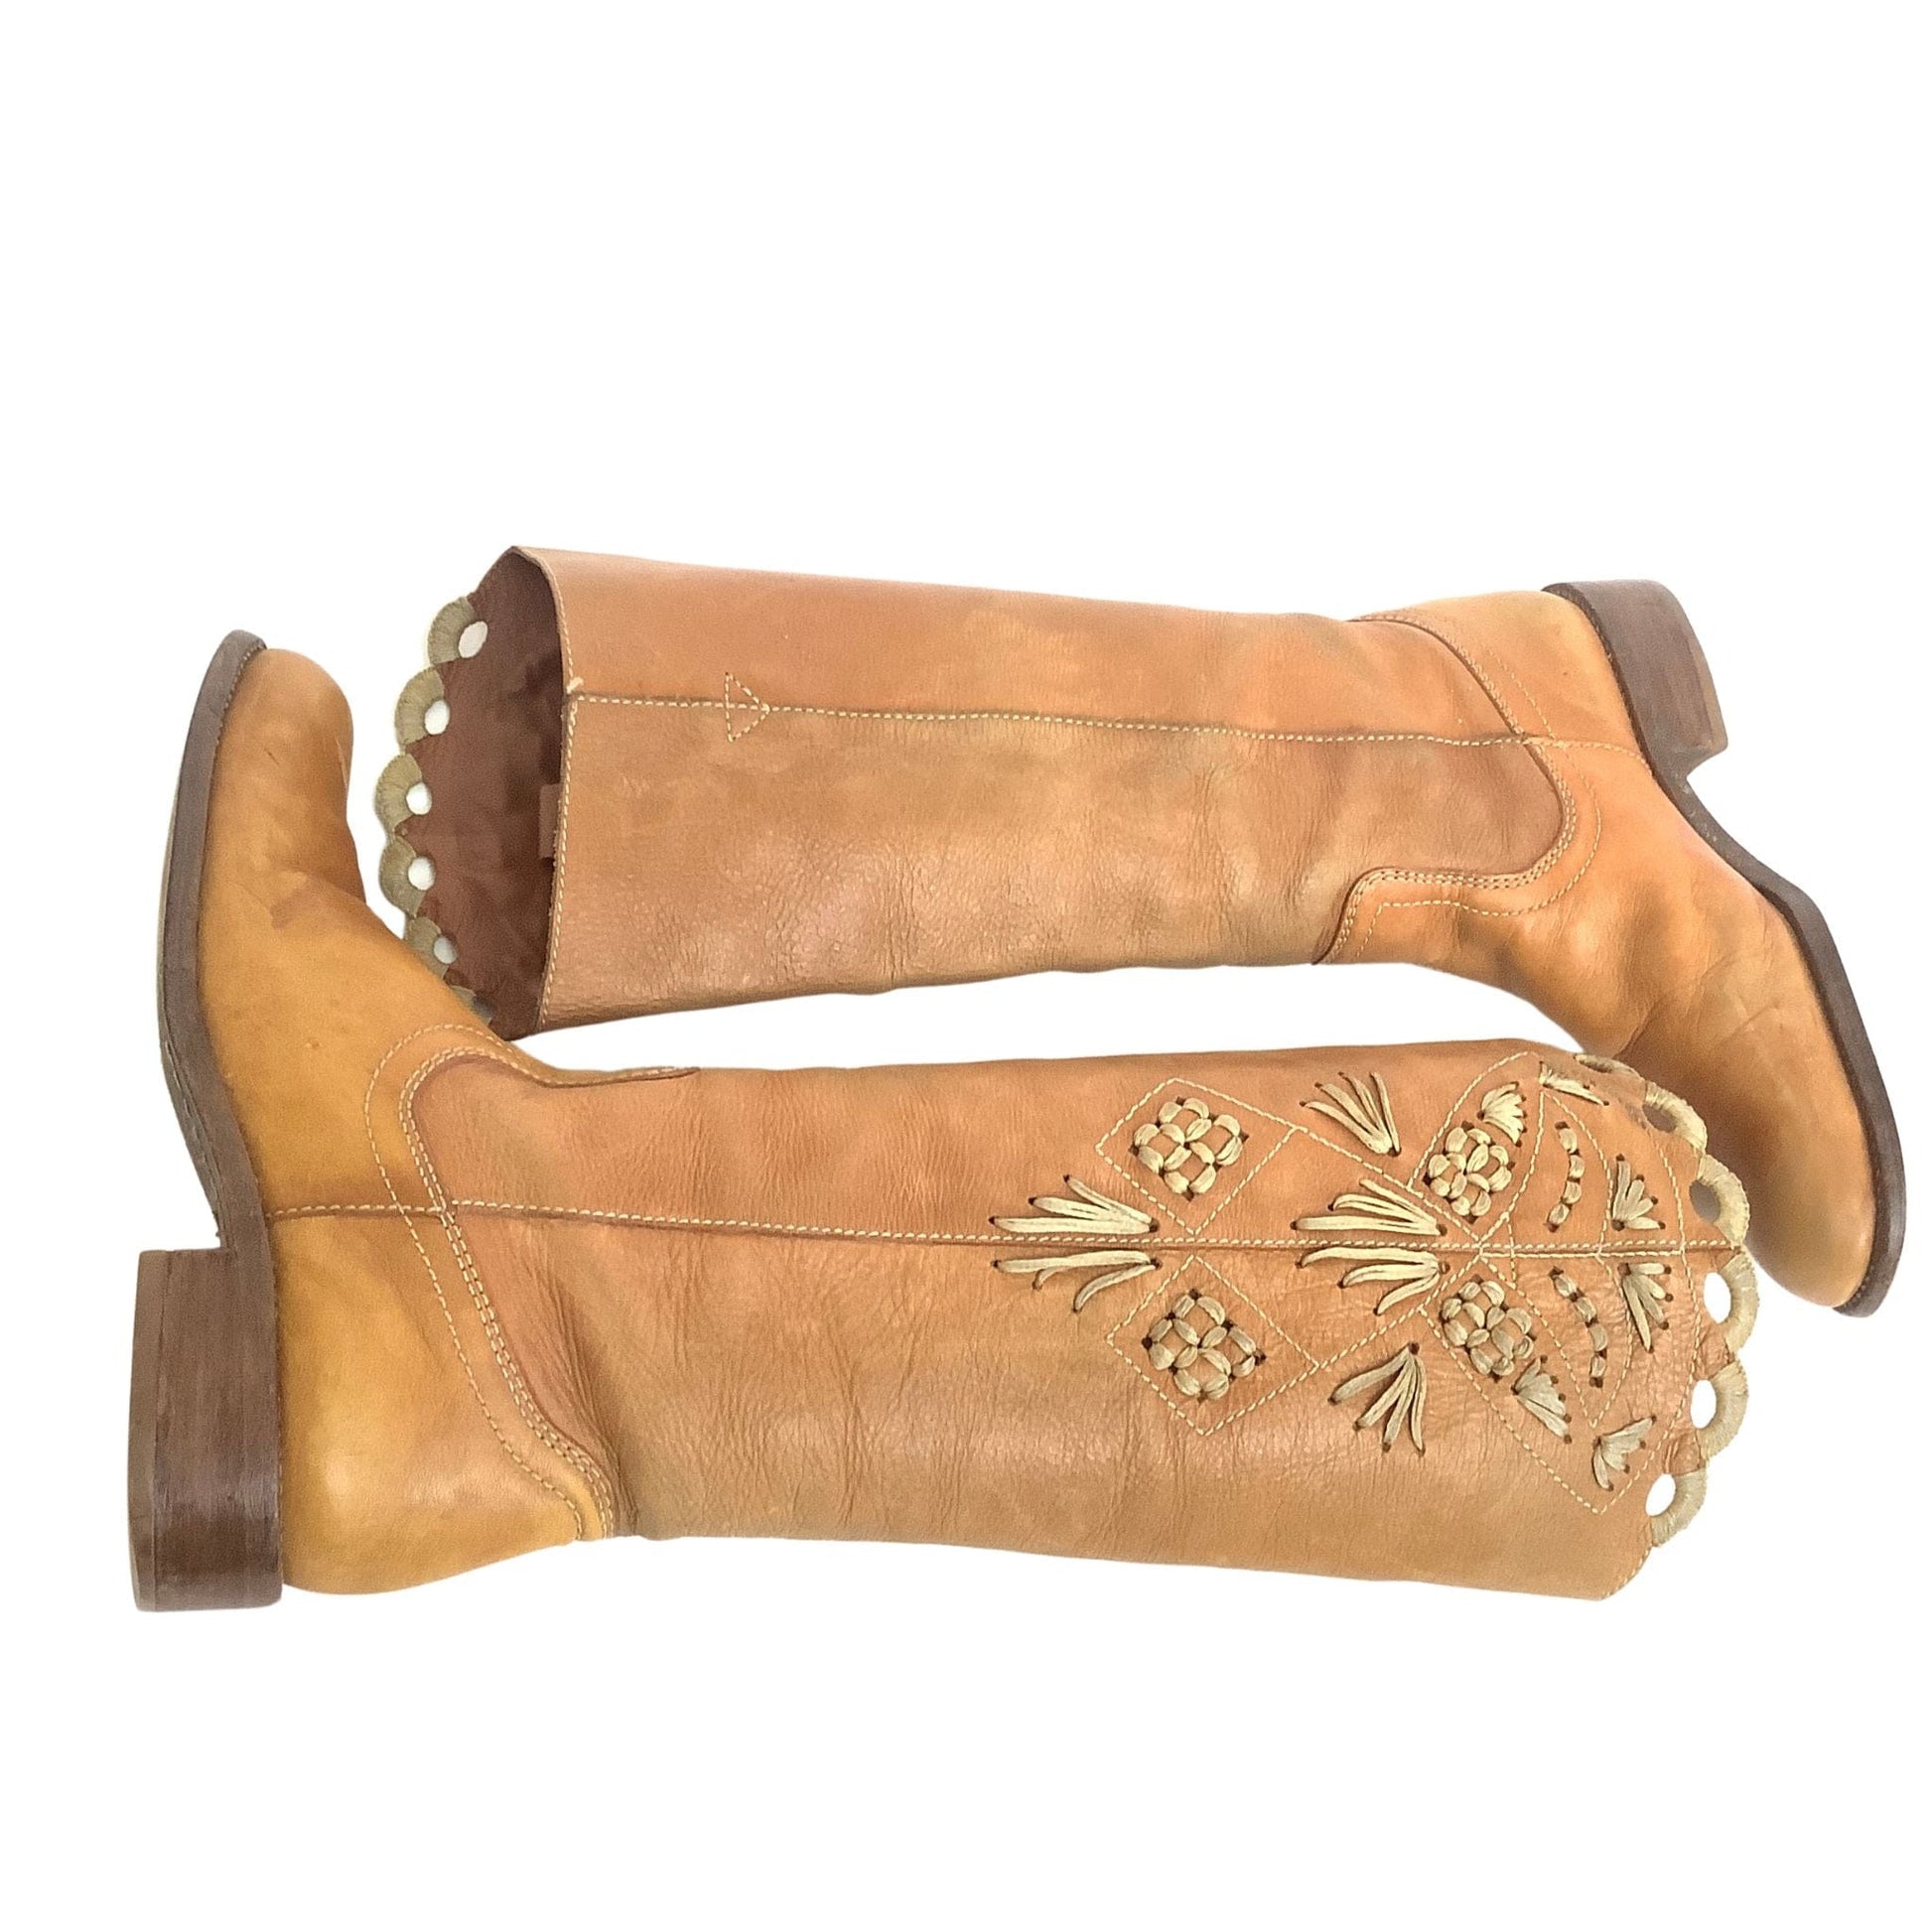 BCBG Embroidered Boots 7.5 / Tan / Y2K - Now